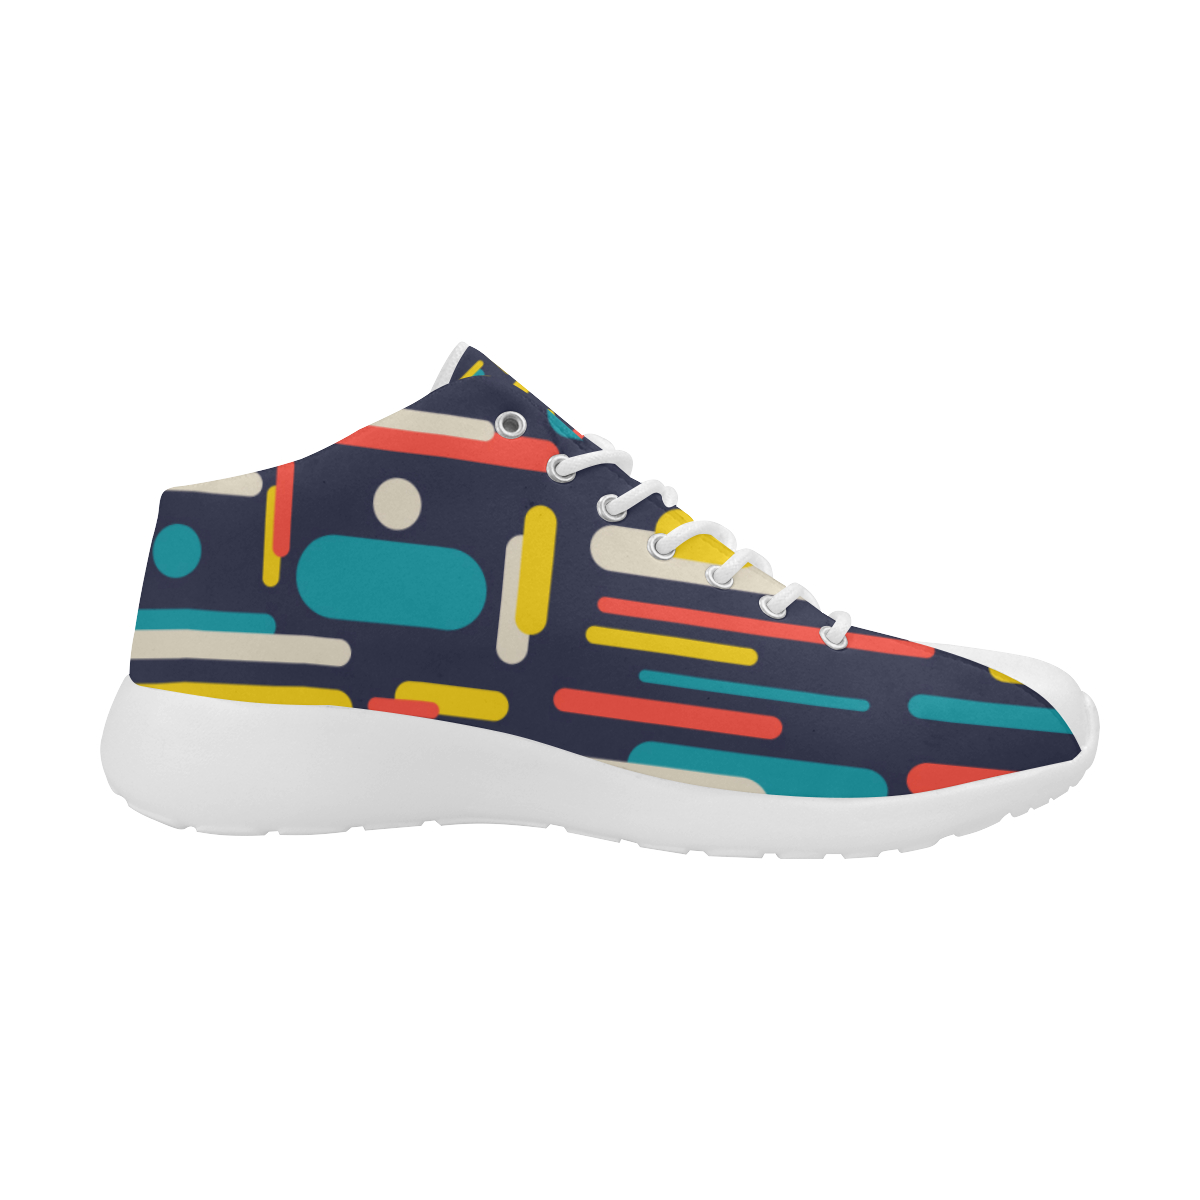 Colorful Rectangles Women's Basketball Training Shoes (Model 47502)